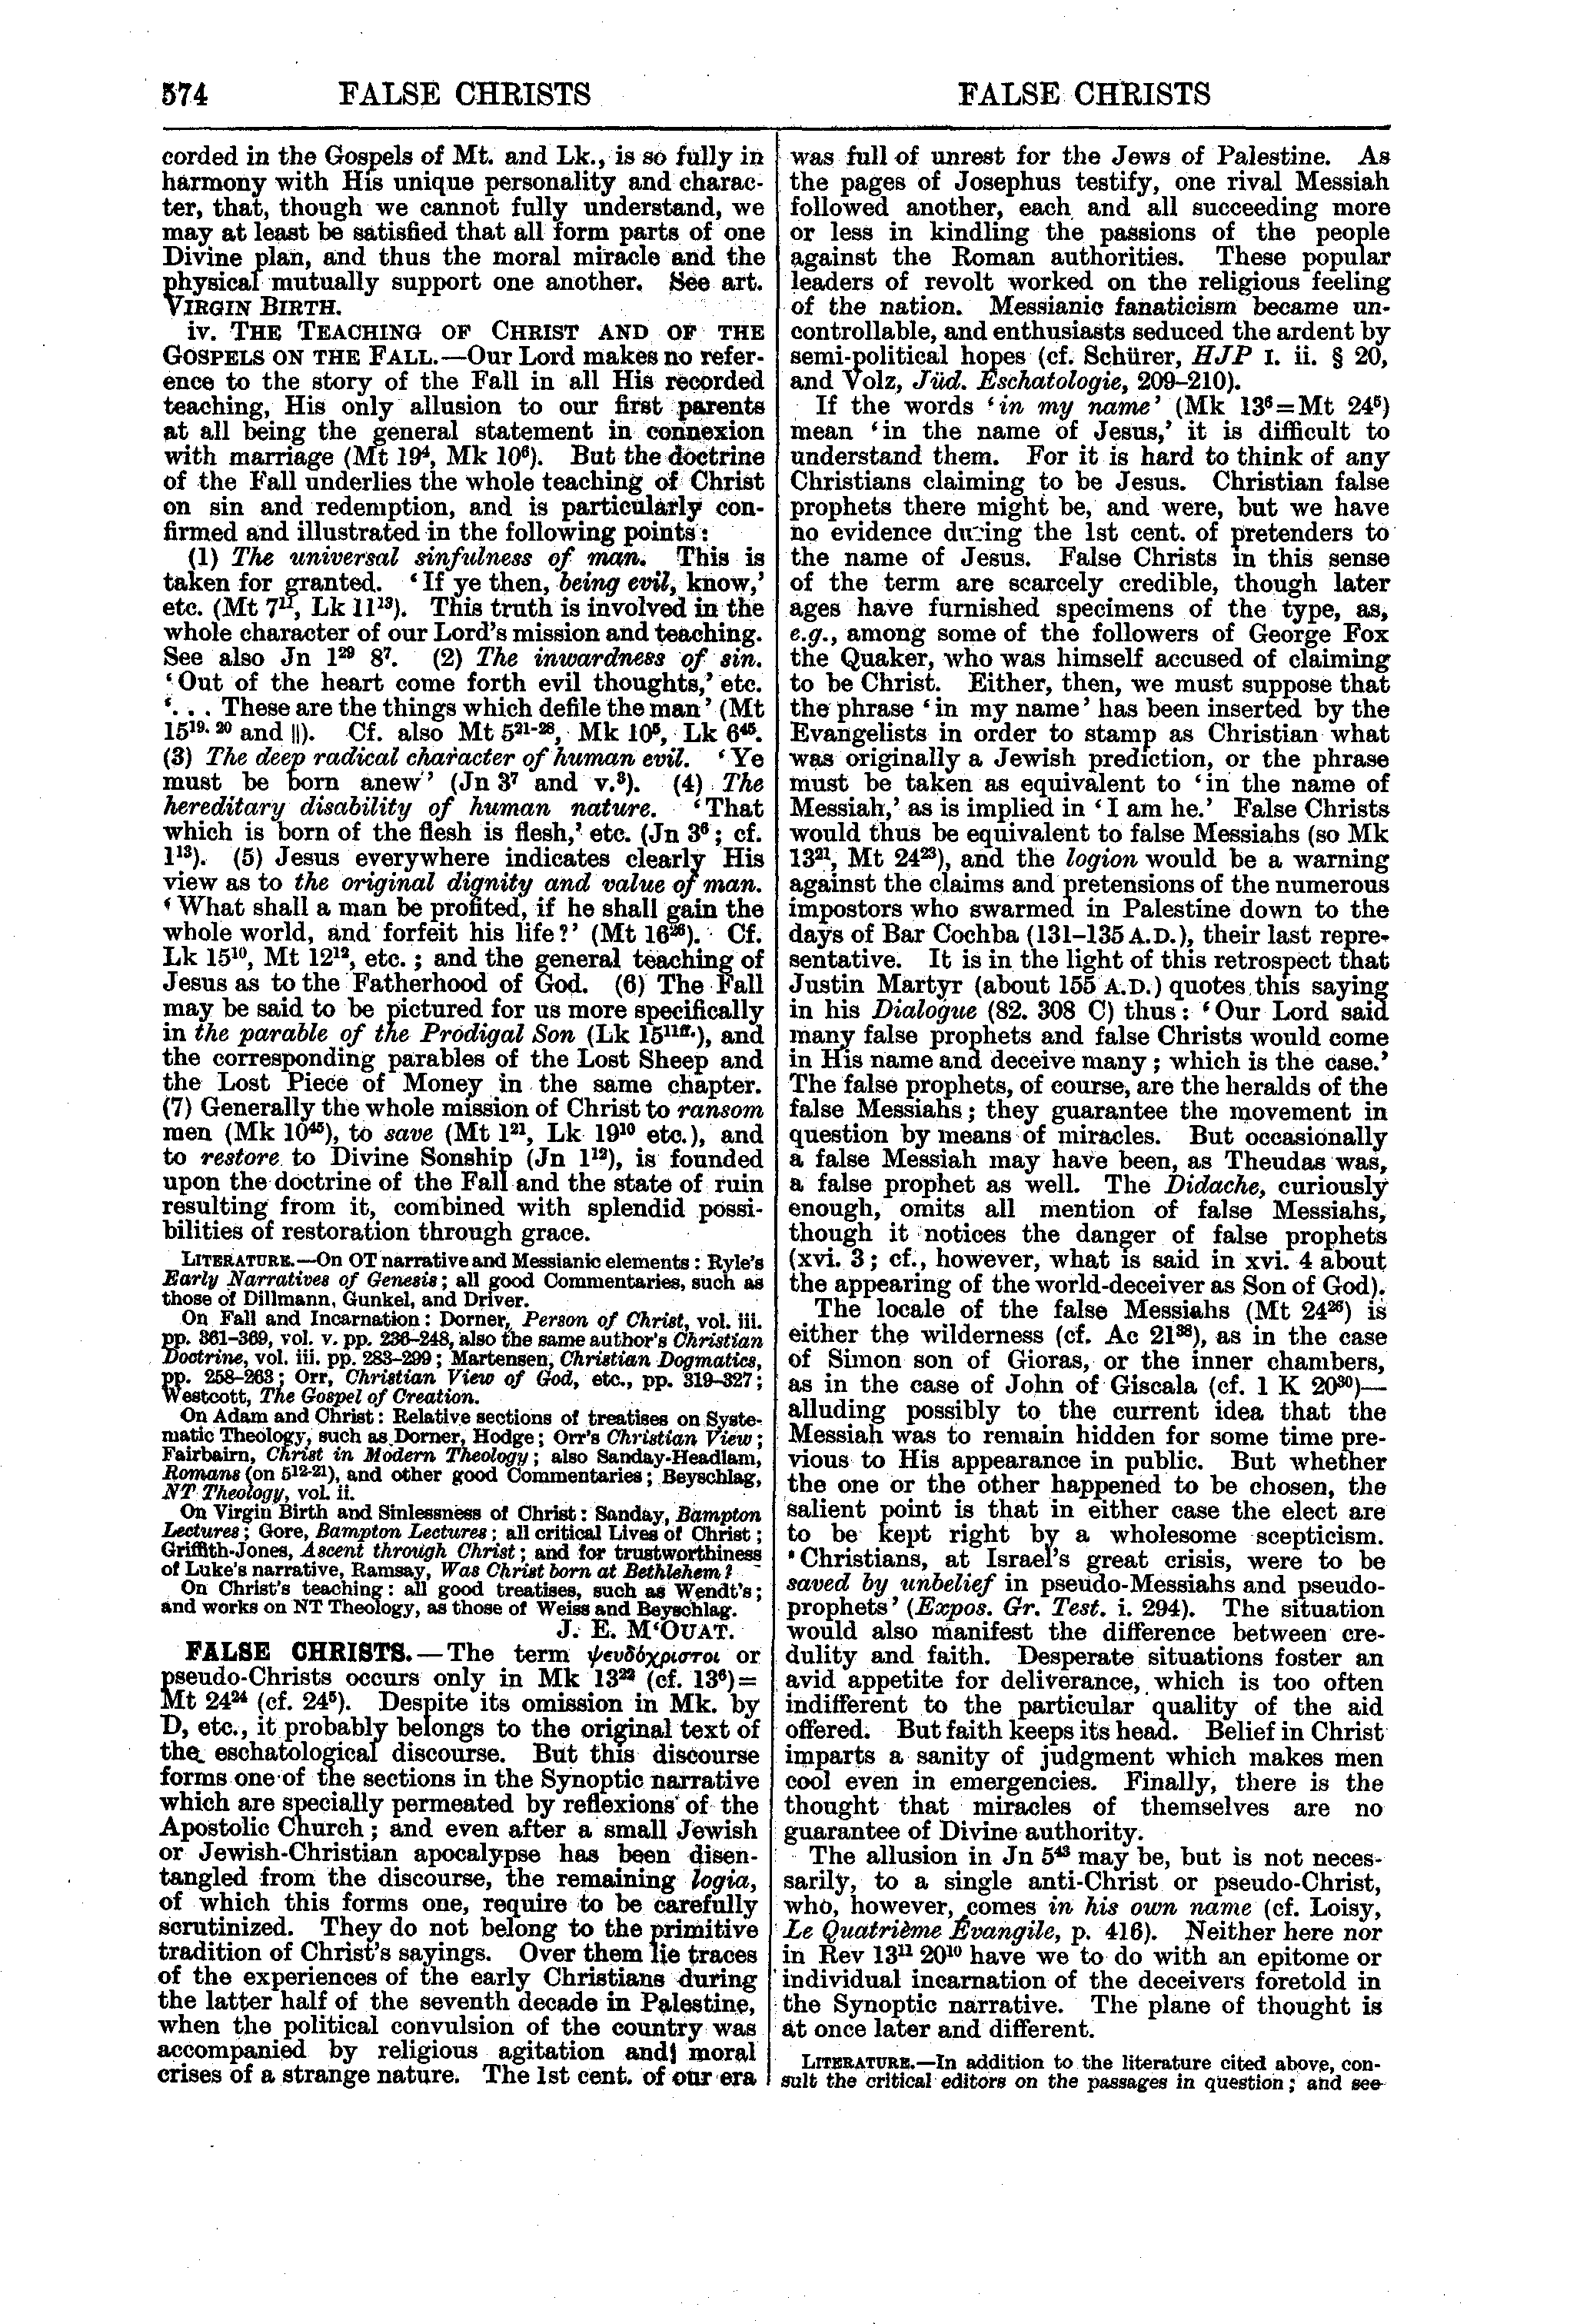 Image of page 574